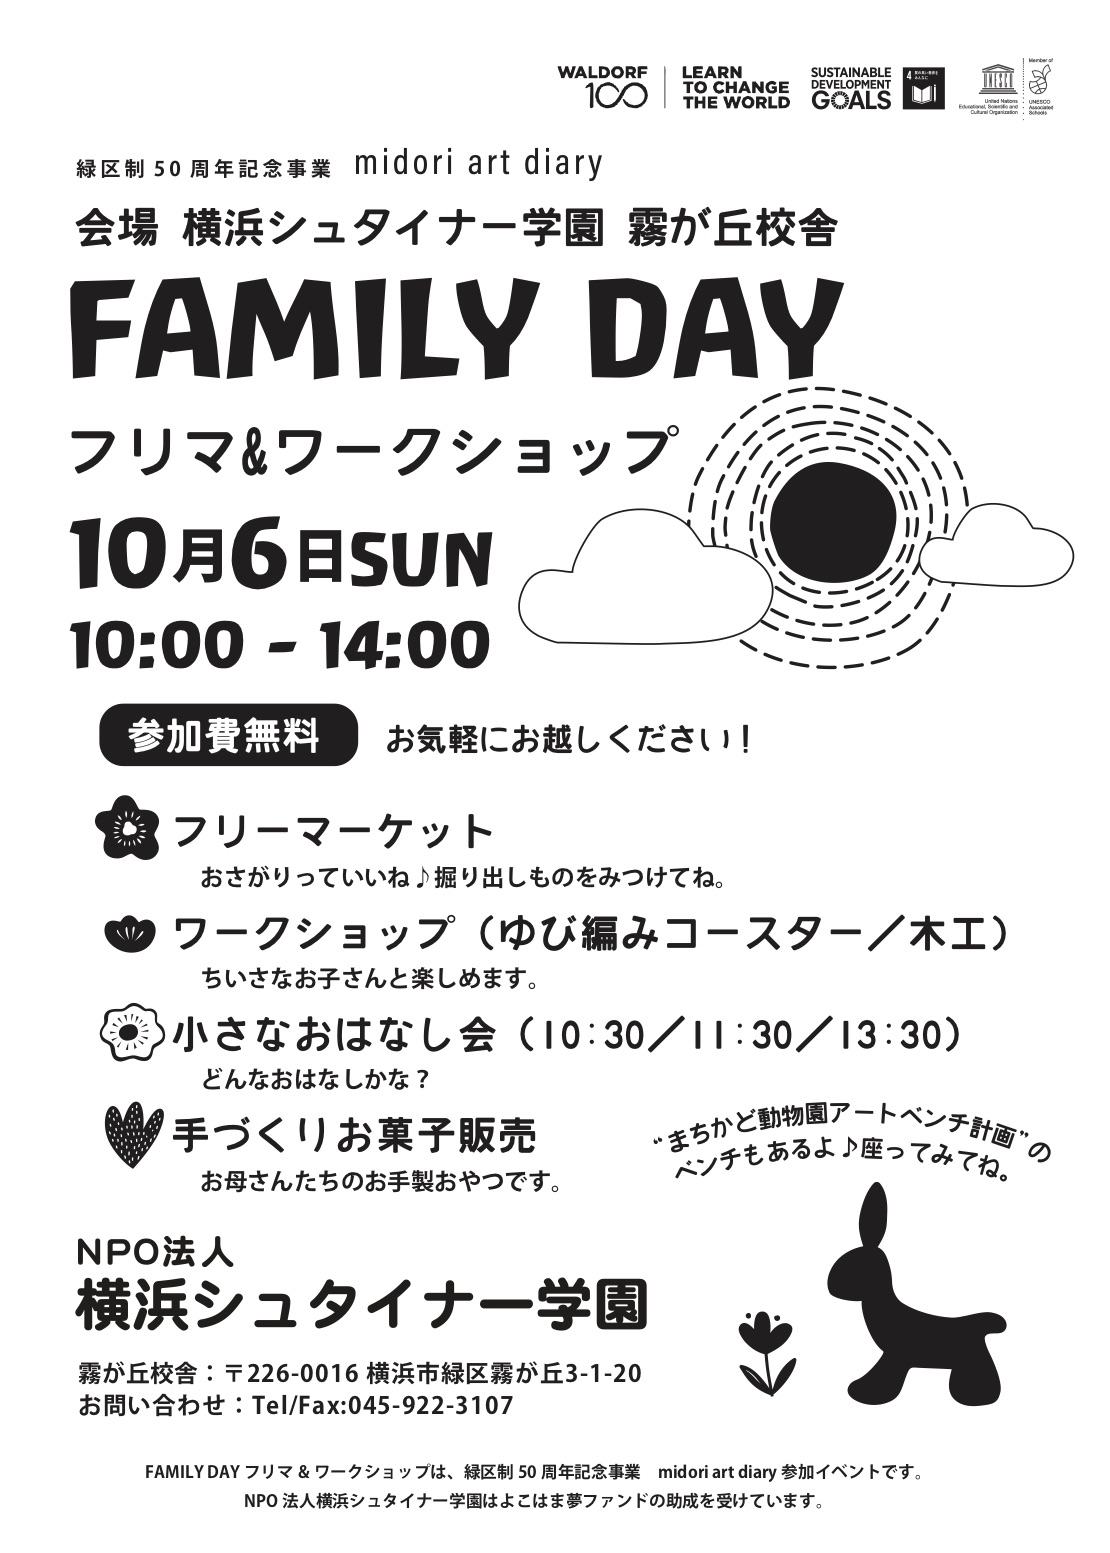 「FAMILY DAY」